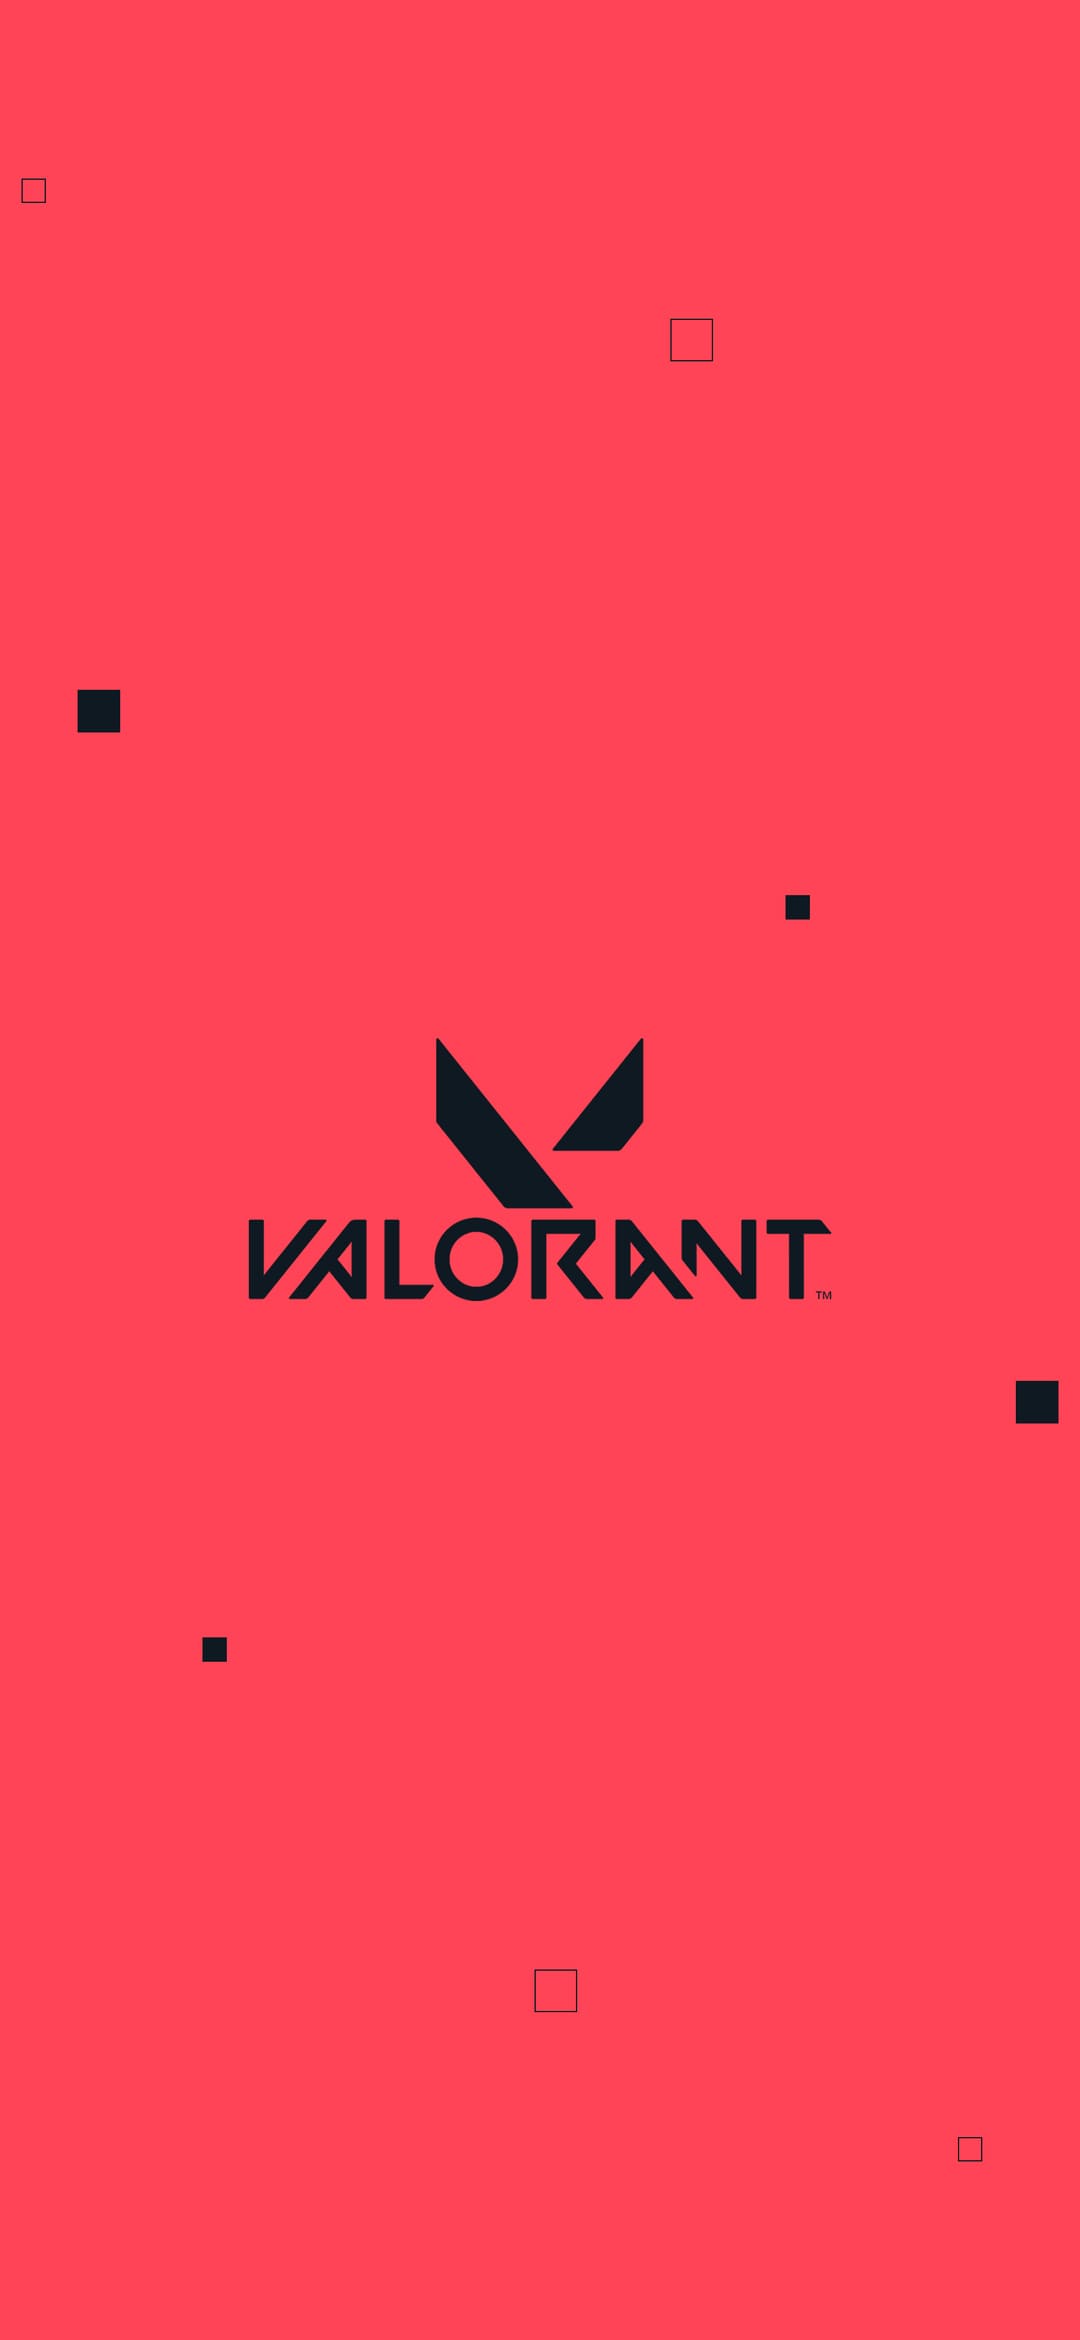 Top 35 Valorant Wallpapers 4k Hd Here we have hd valorant wallpapers to give your phone's homescreen an appealing look. getty wallpapers